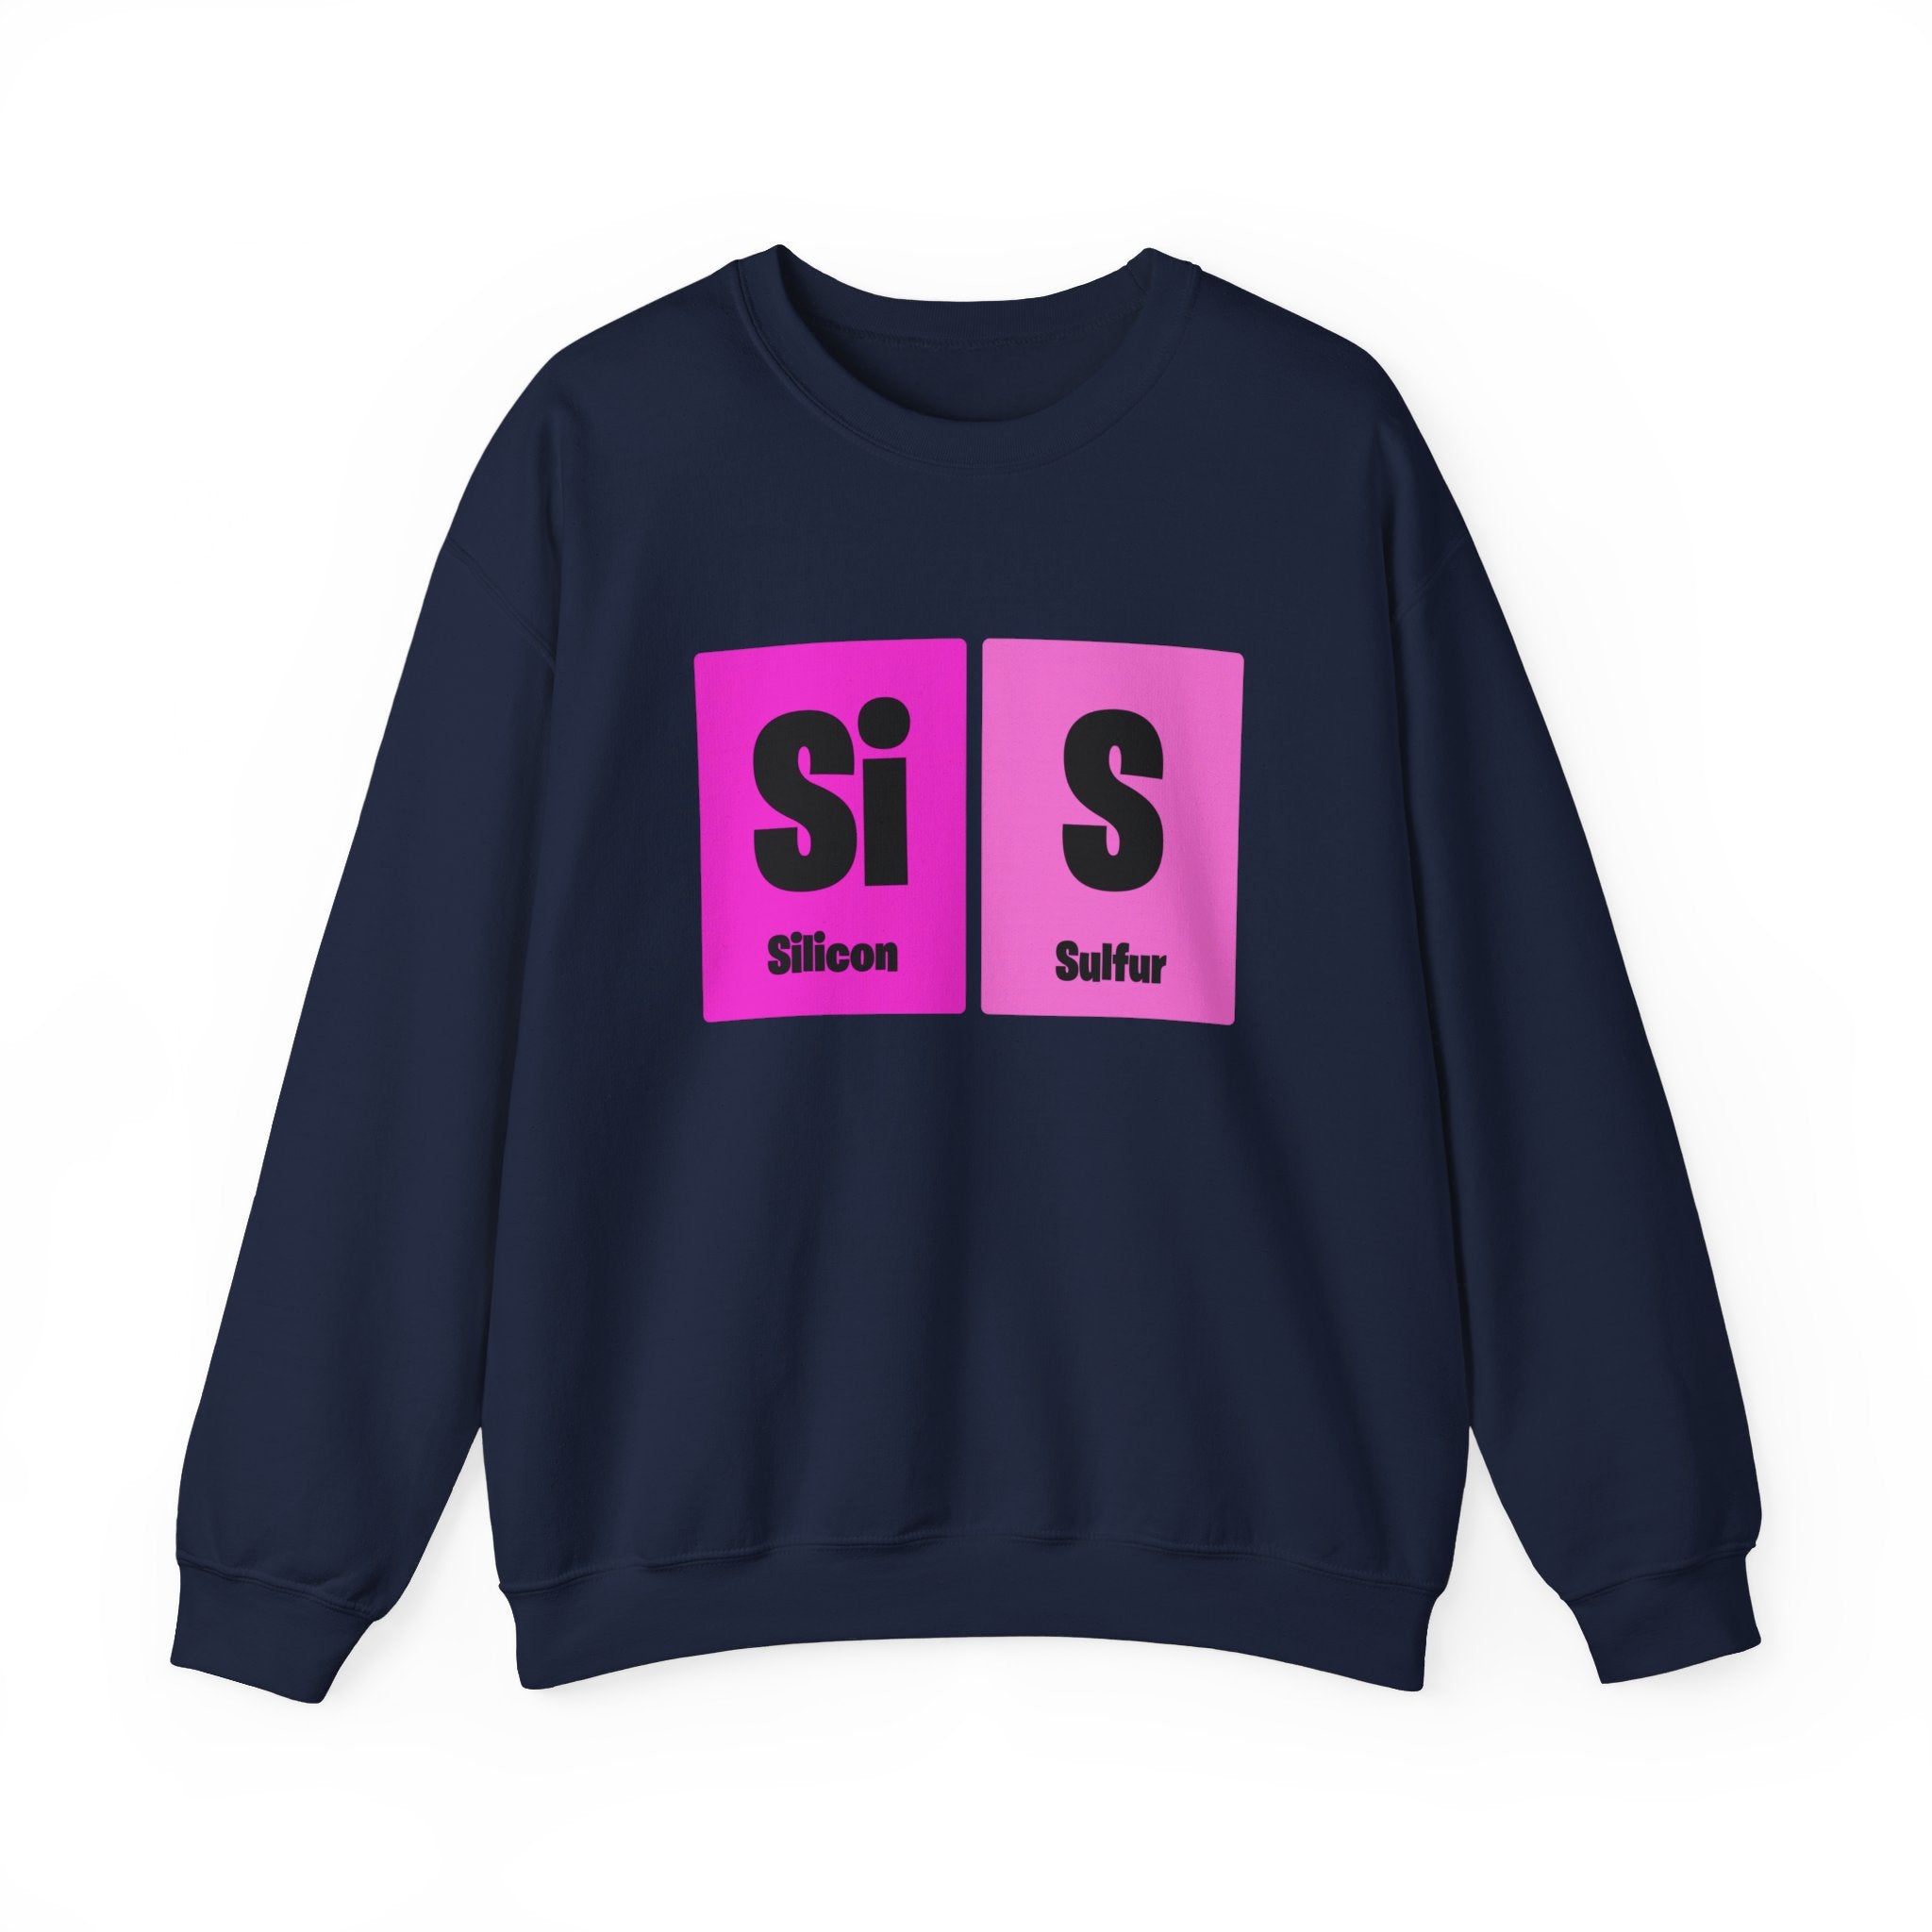 A navy blue Si-S Light Pendant - Sweatshirt featuring pink blocks with the element symbols "Si" for Silicon and "S" for Sulfur, along with their names underneath. This fashionable piece ensures warmth while showcasing your love for chemistry, making it a perfect blend of fashion & warmth.